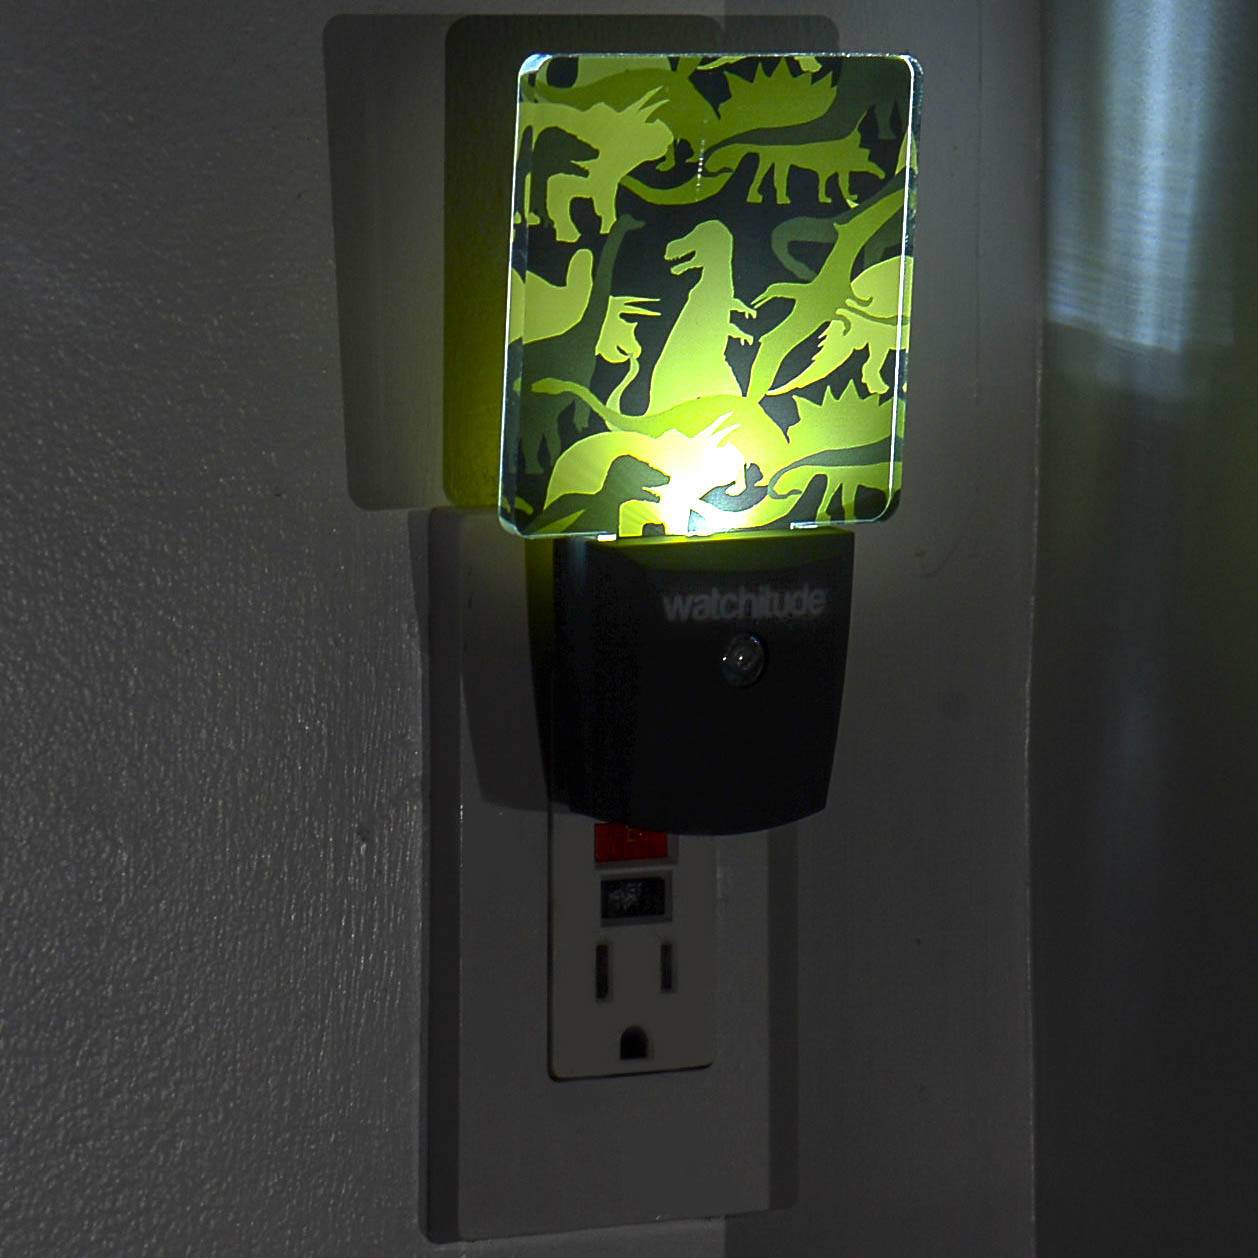 LED Night Light- 4 Styles to Choose From!